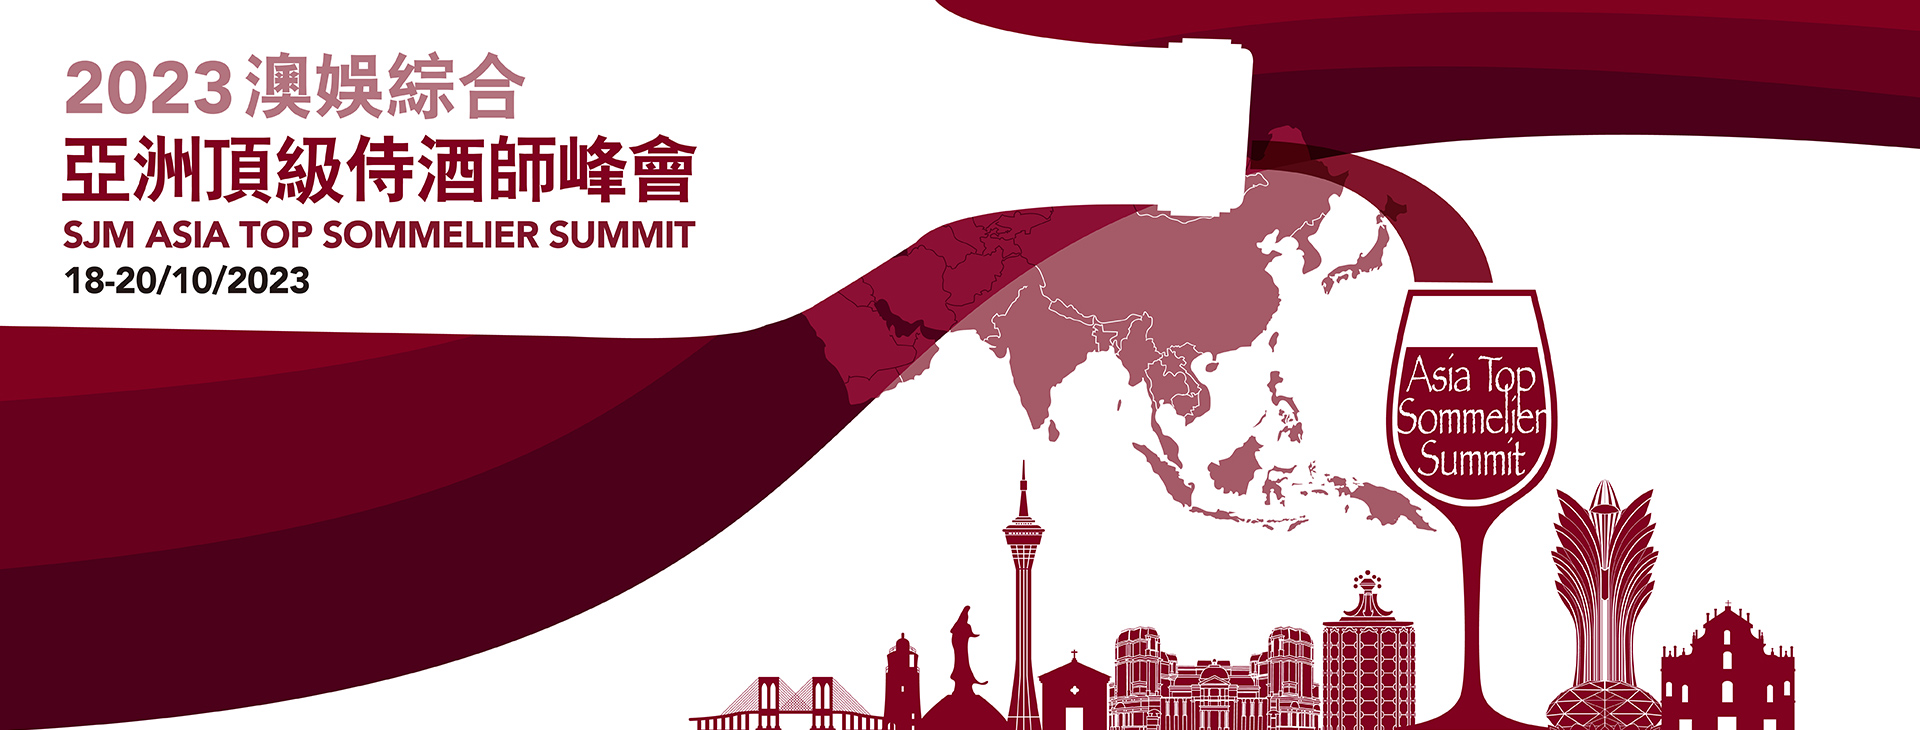 Asia Top Sommelier Summit